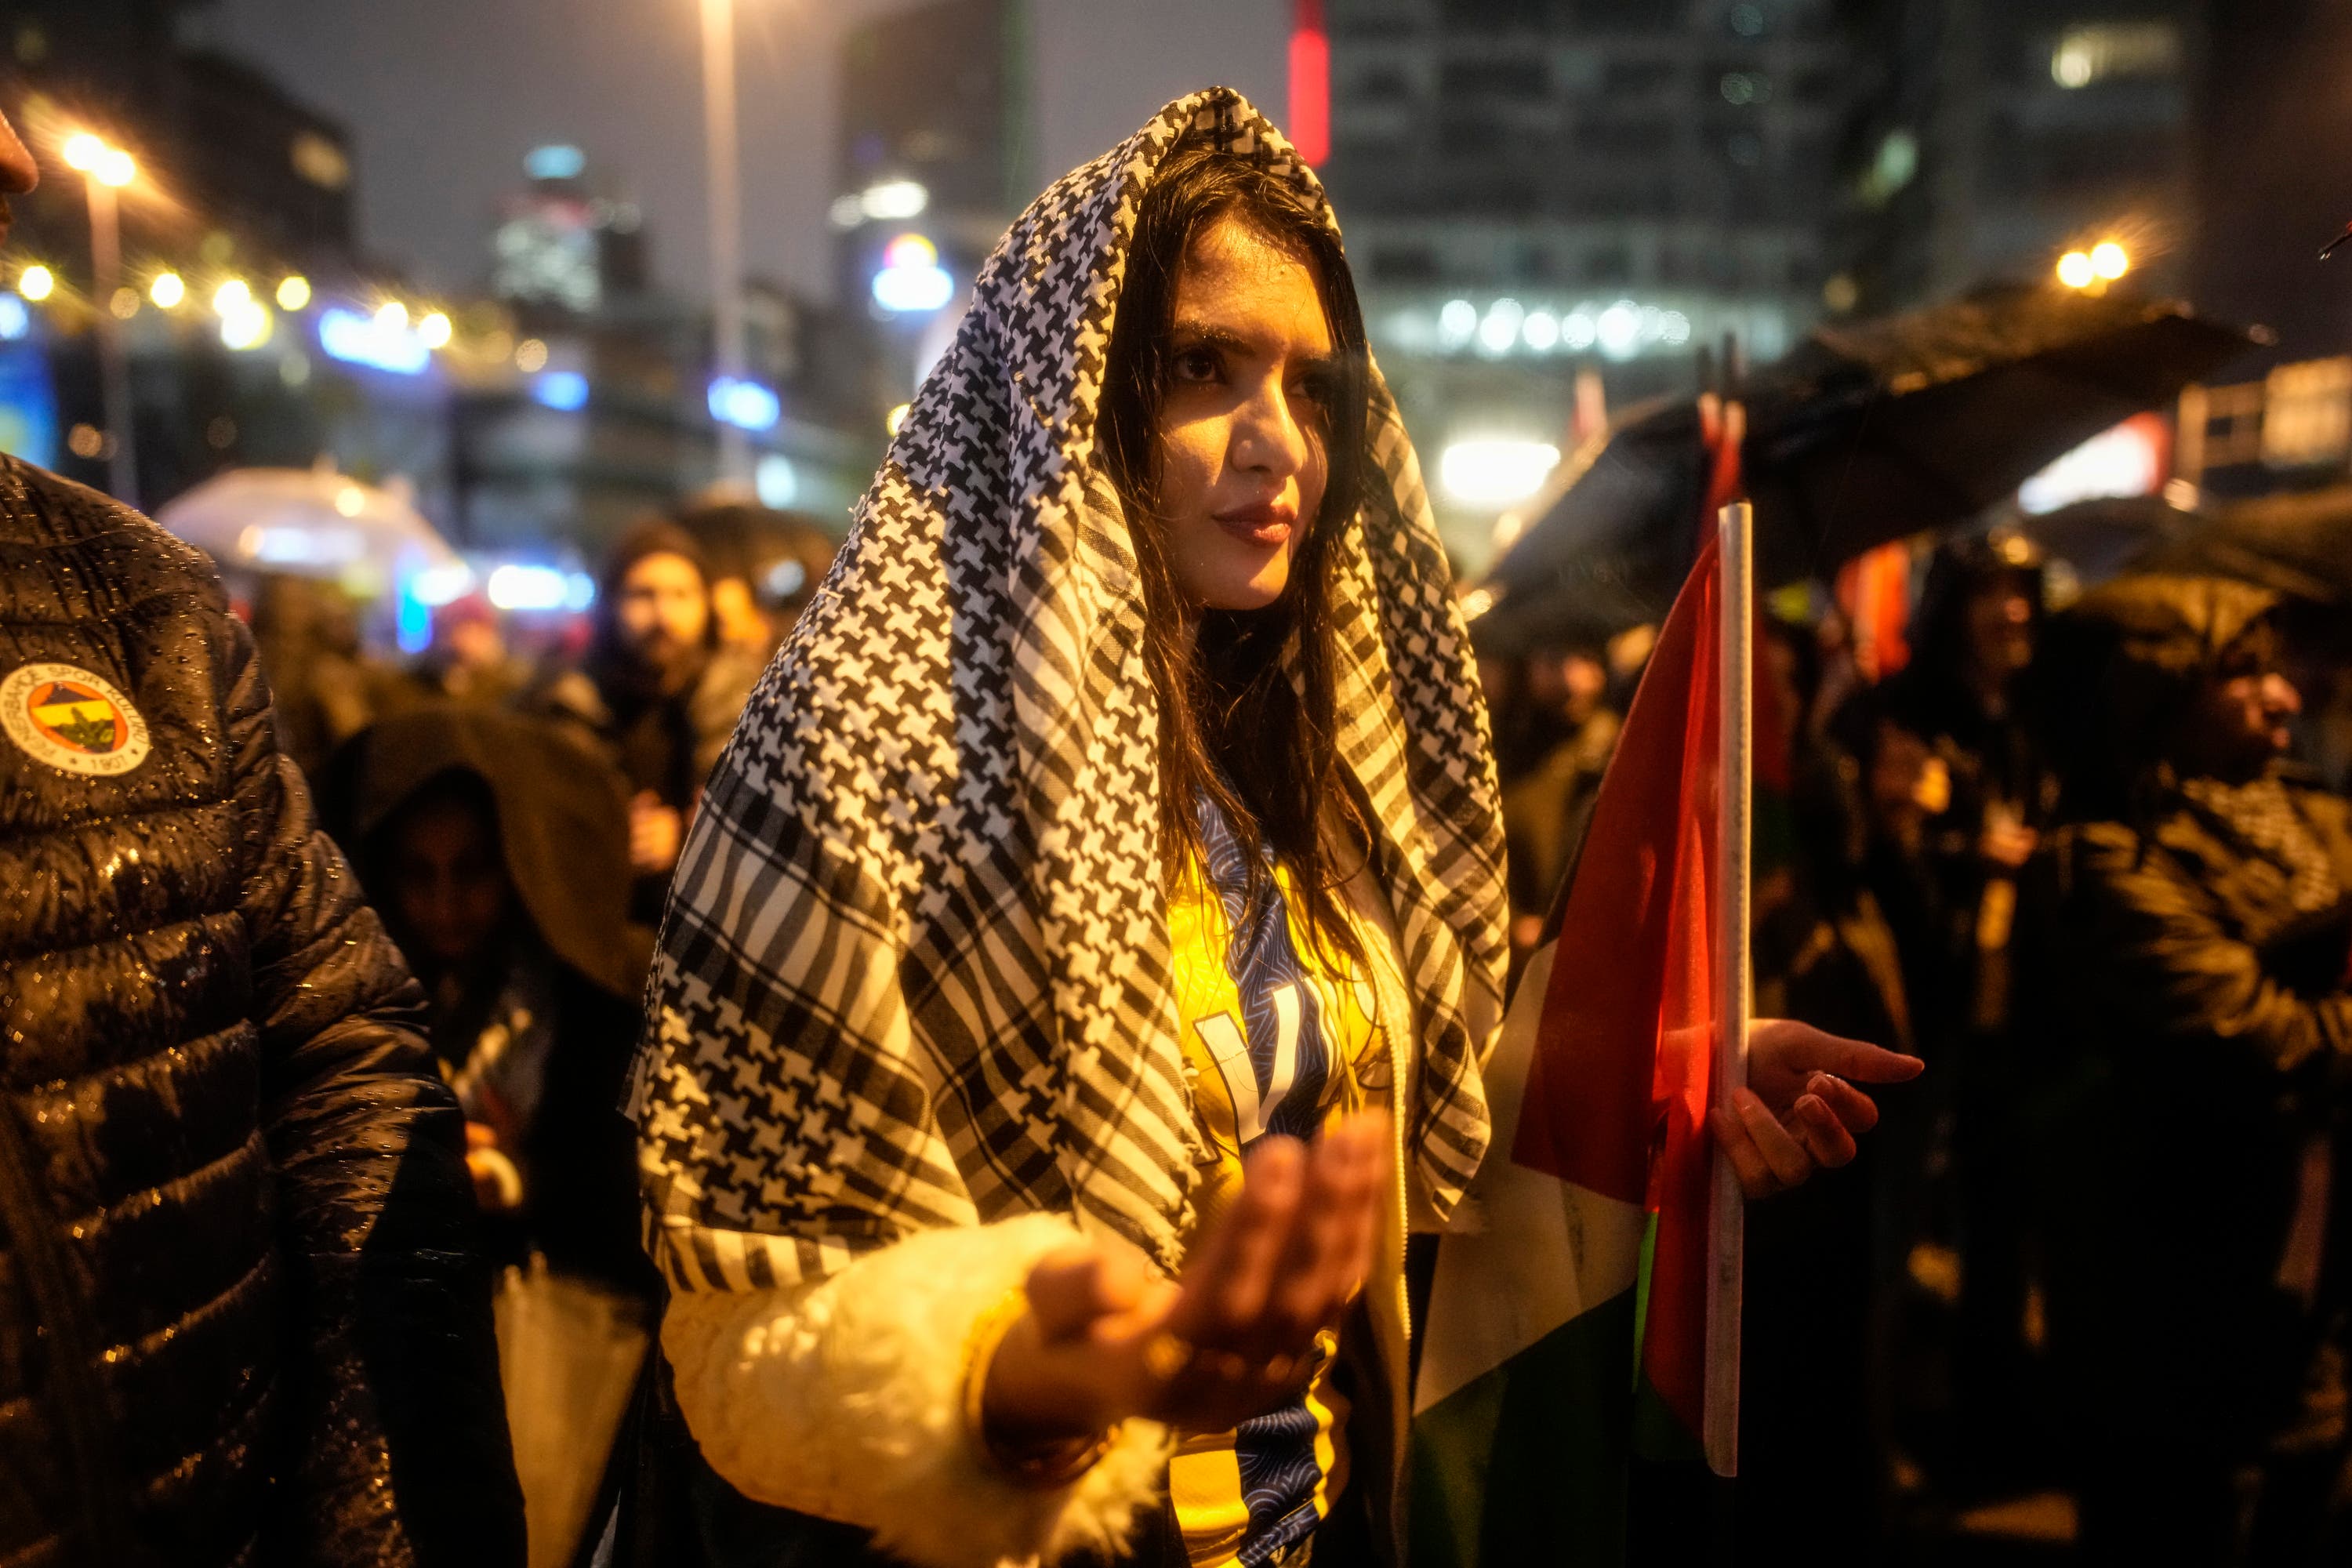 A woman prays during heavy rain during a pro-Palestinian protest outside the Israeli consulate in Istanbul on Saturday.